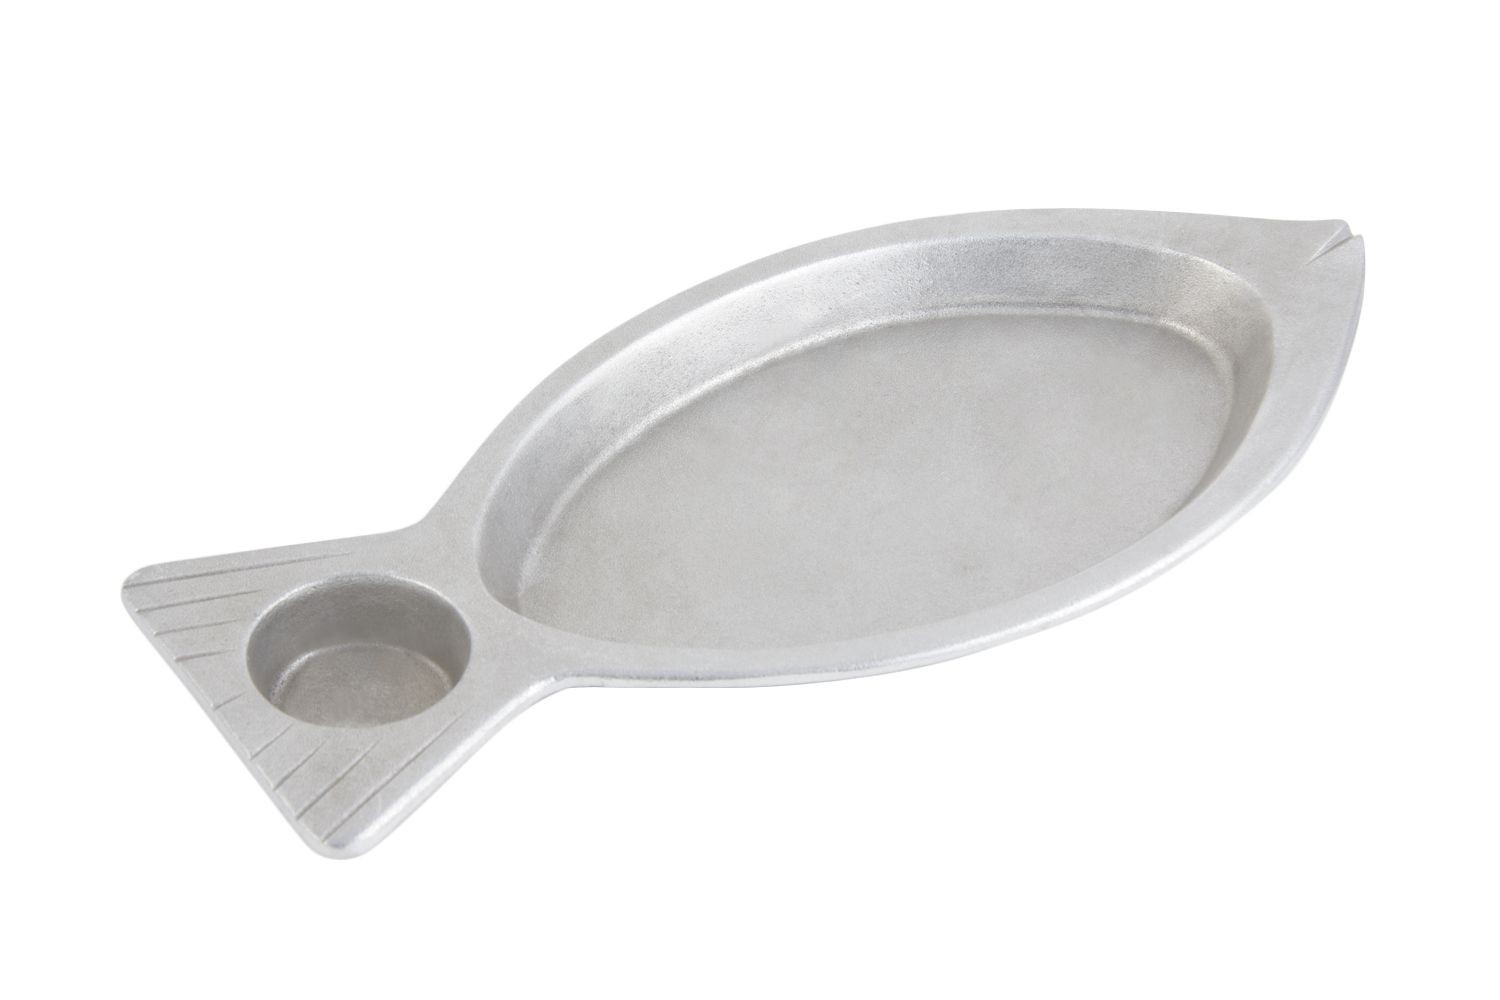 Bon Chef 5038P Oval Fish Platter with Sauce Holder, Pewter Glo 7" x 15 1/4", Set of 6